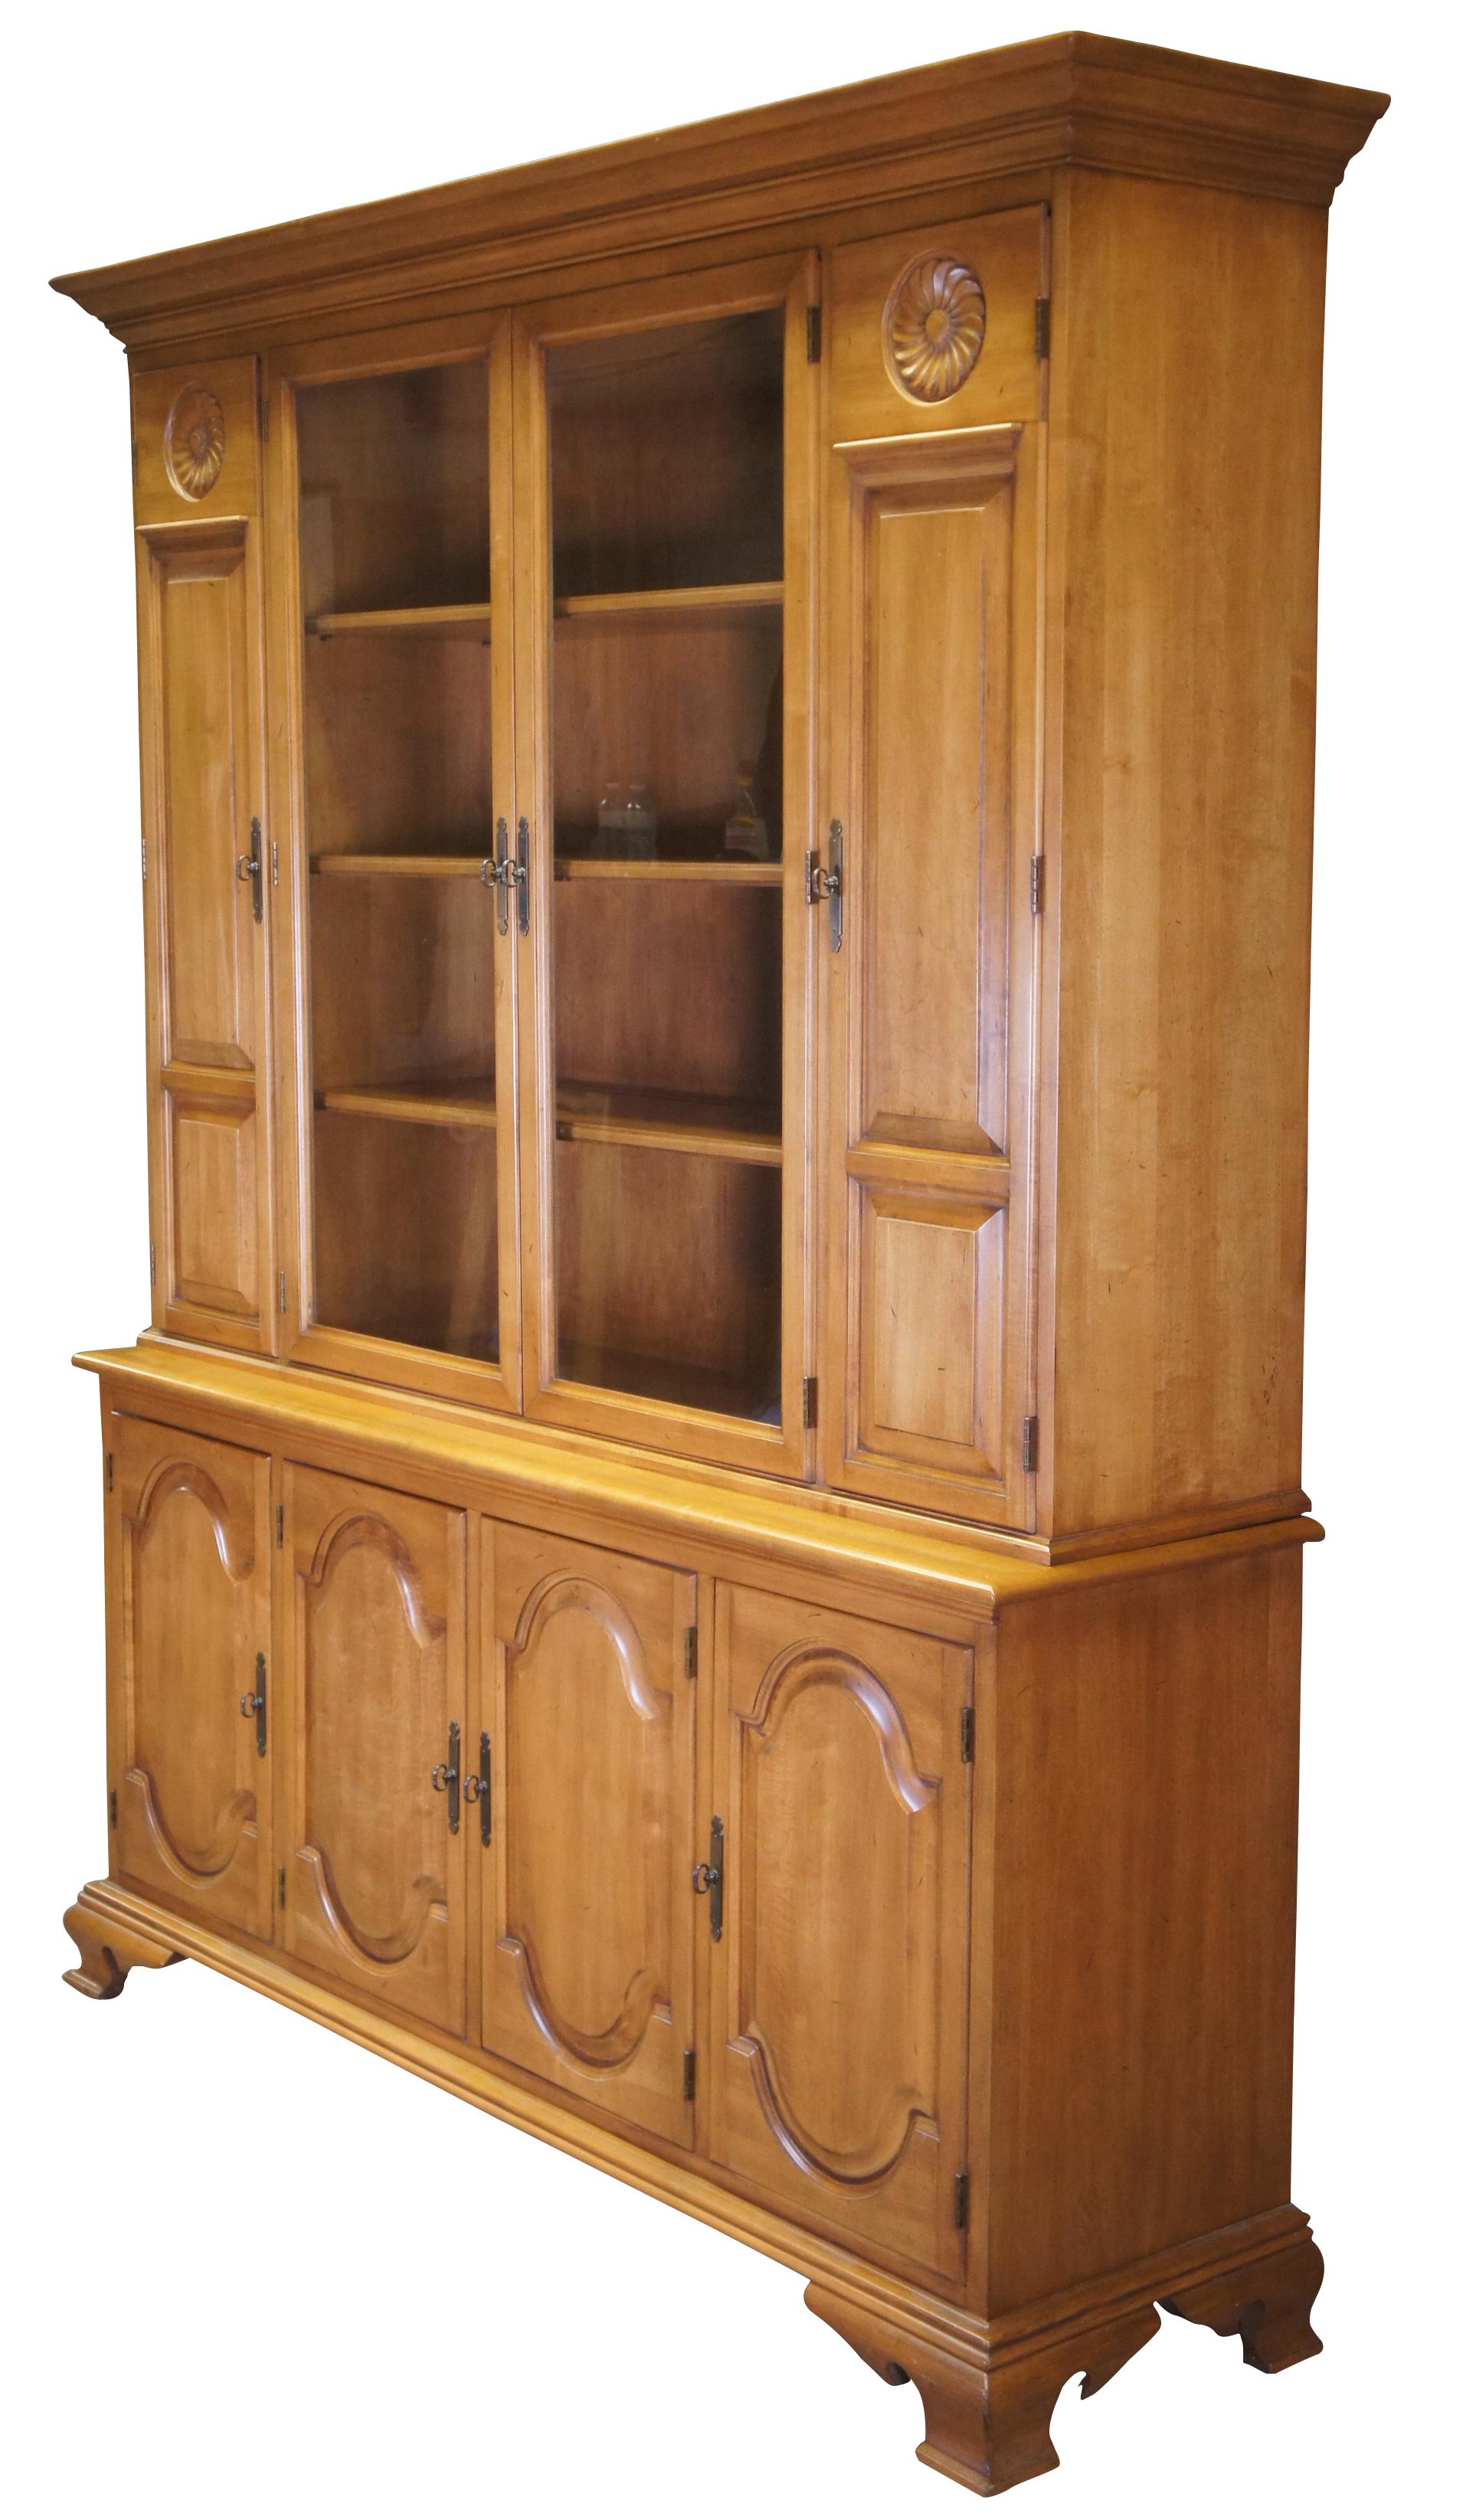 Circa 1970s Italian Provincial China Hutch. Made from walnut with a stepback top with 4 glass covered shelves. Features outer cabinet, lower storage, floral carvings and bracket feet. Measure: 77